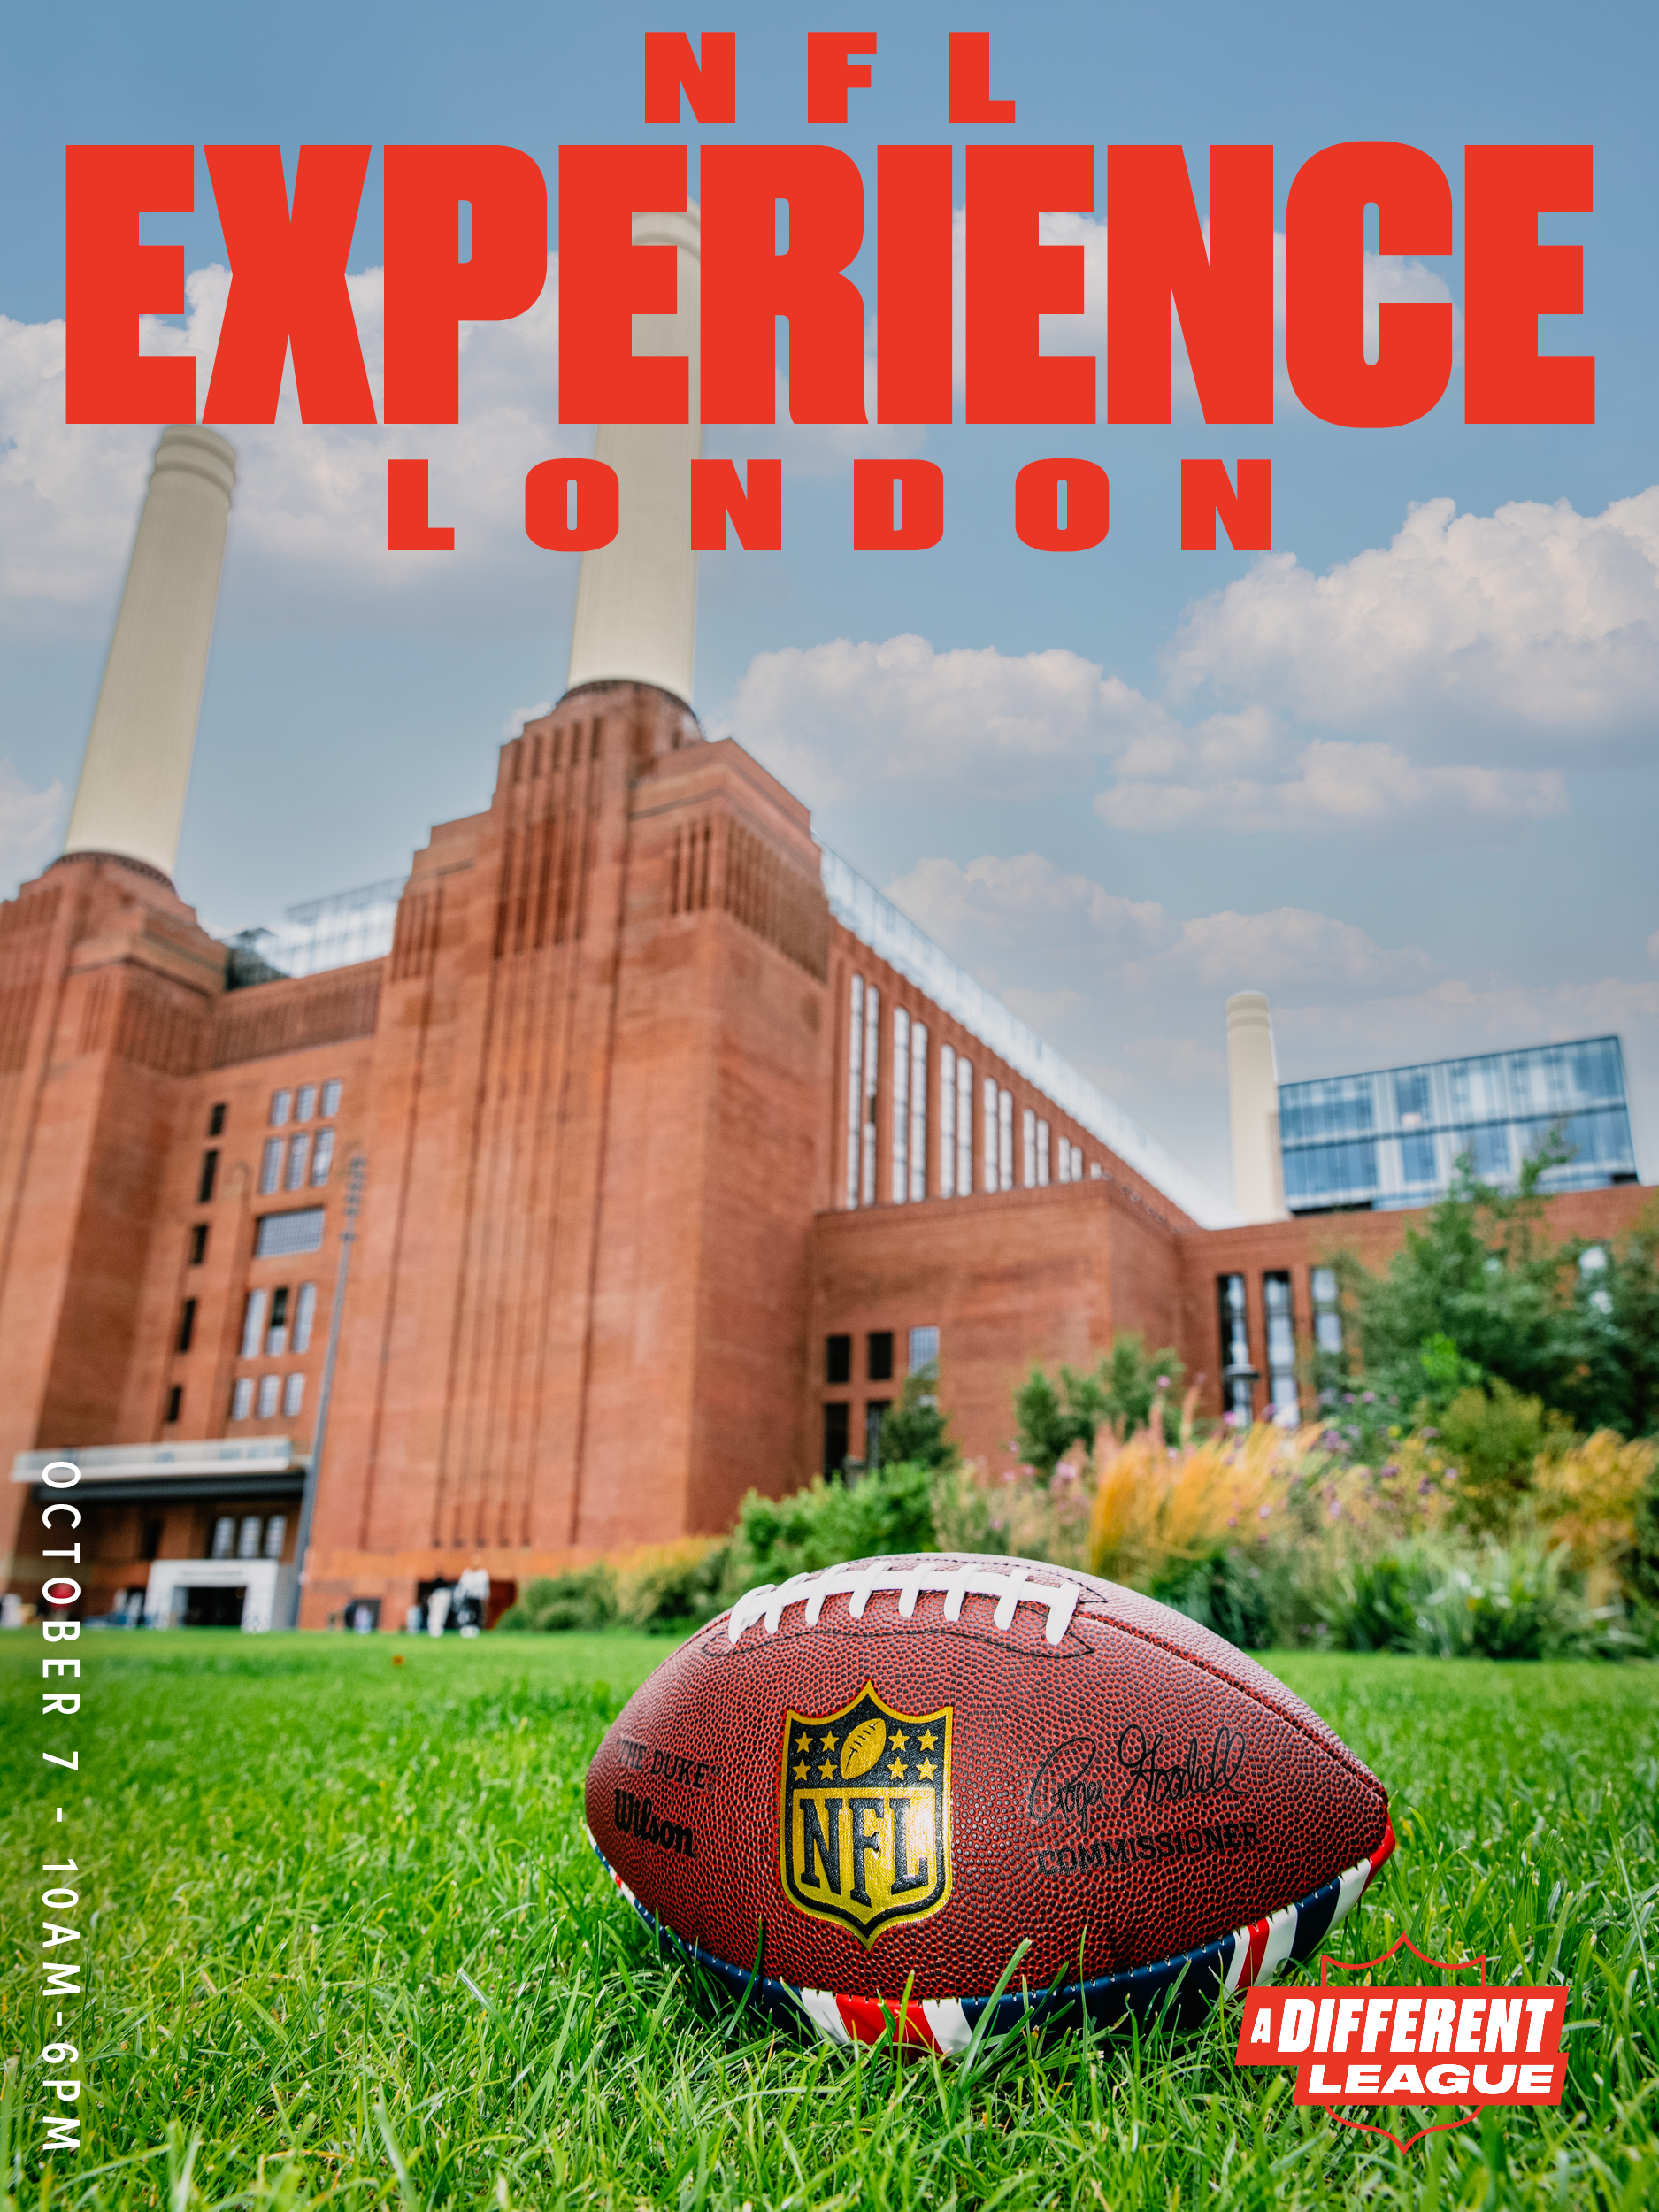 NFL Experience London fan event at Battersea Power Station